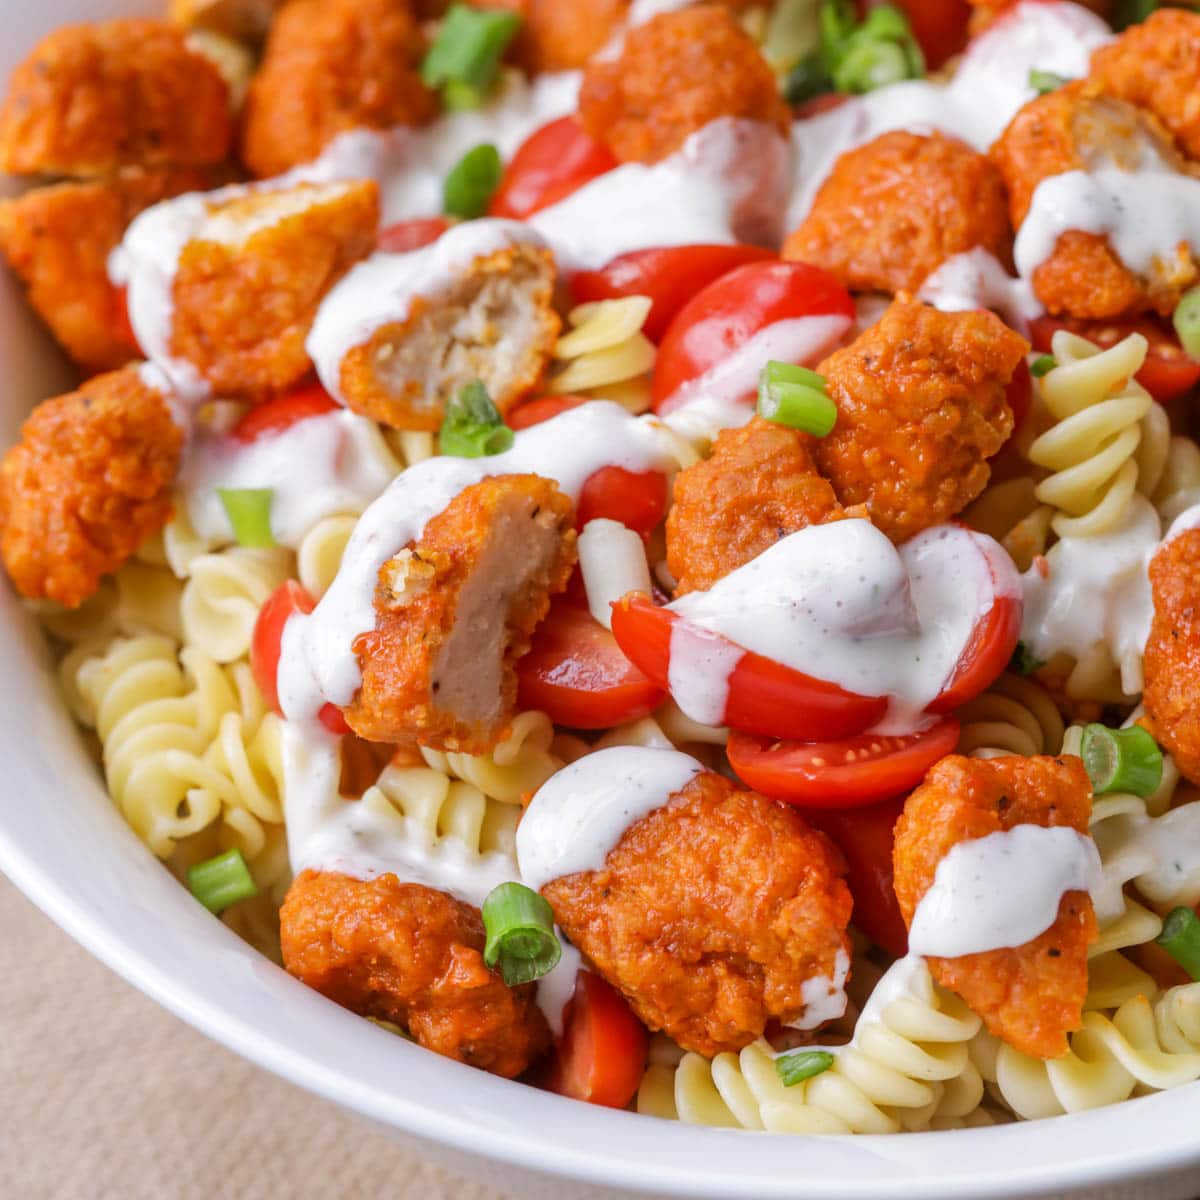 Buffalo chicken pasta salad served in a white bowl.